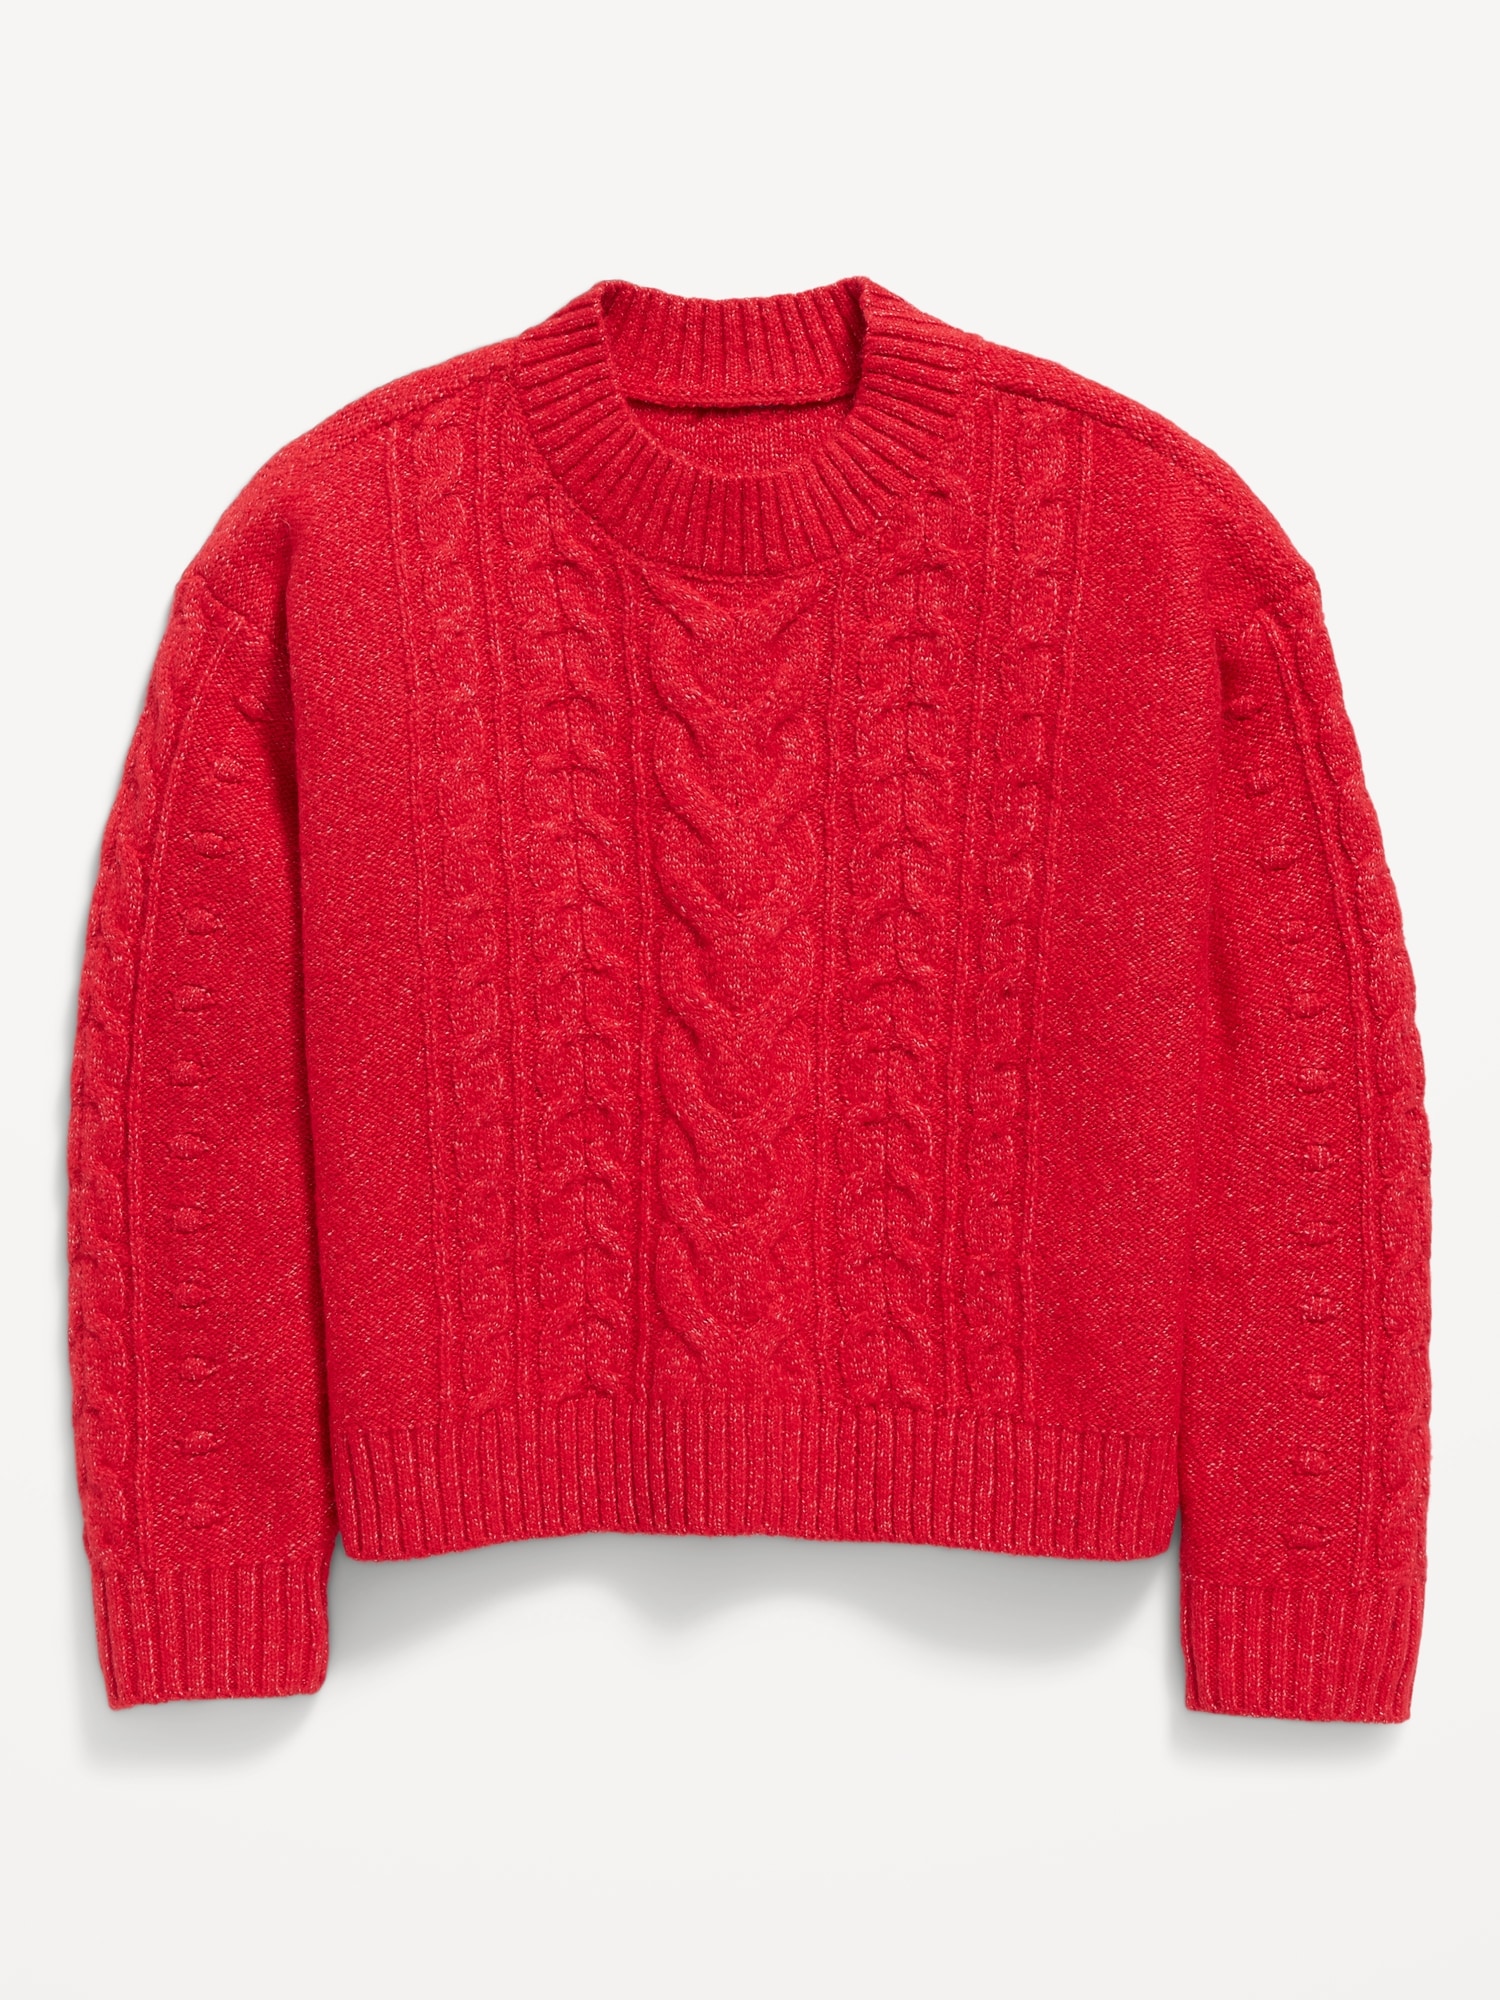 Old Navy Cozy Cable-Knit Mock-Neck Sweater for Girls red. 1